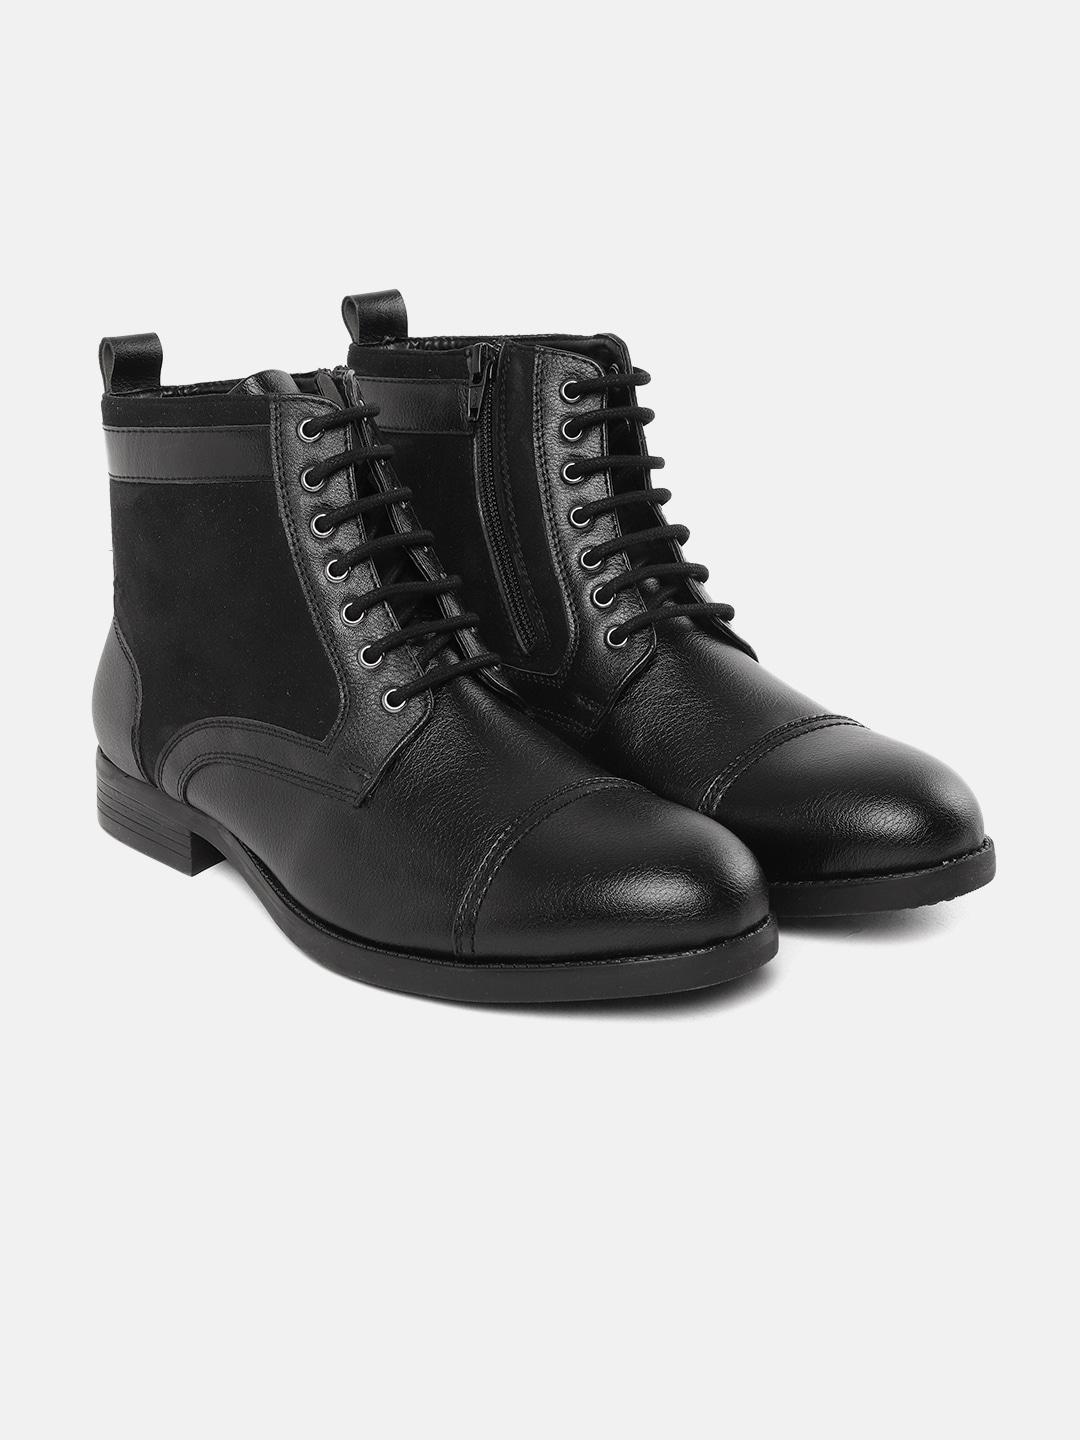 the roadster lifestyle co men black solid mid top flat boots